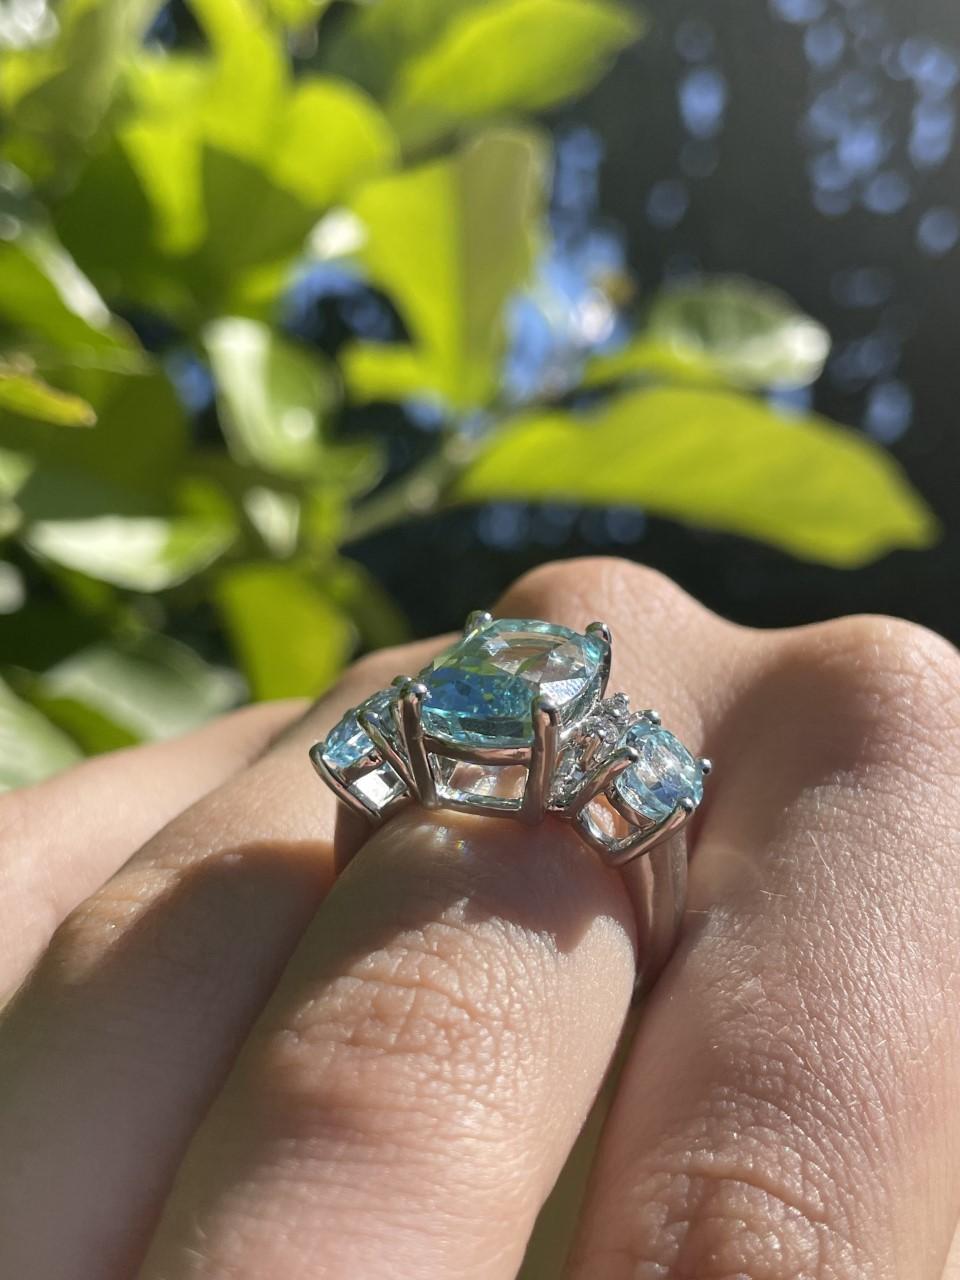 Aquamarine and Diamond Cocktail/Dress Ring with 3 oval aquamarines and 4 round brilliant cut diamonds. The stones are set in an elegant 18ct white gold four claw setting. The shank measures 4.2mm at the shoulder, tapering down to 2.8mm and has a